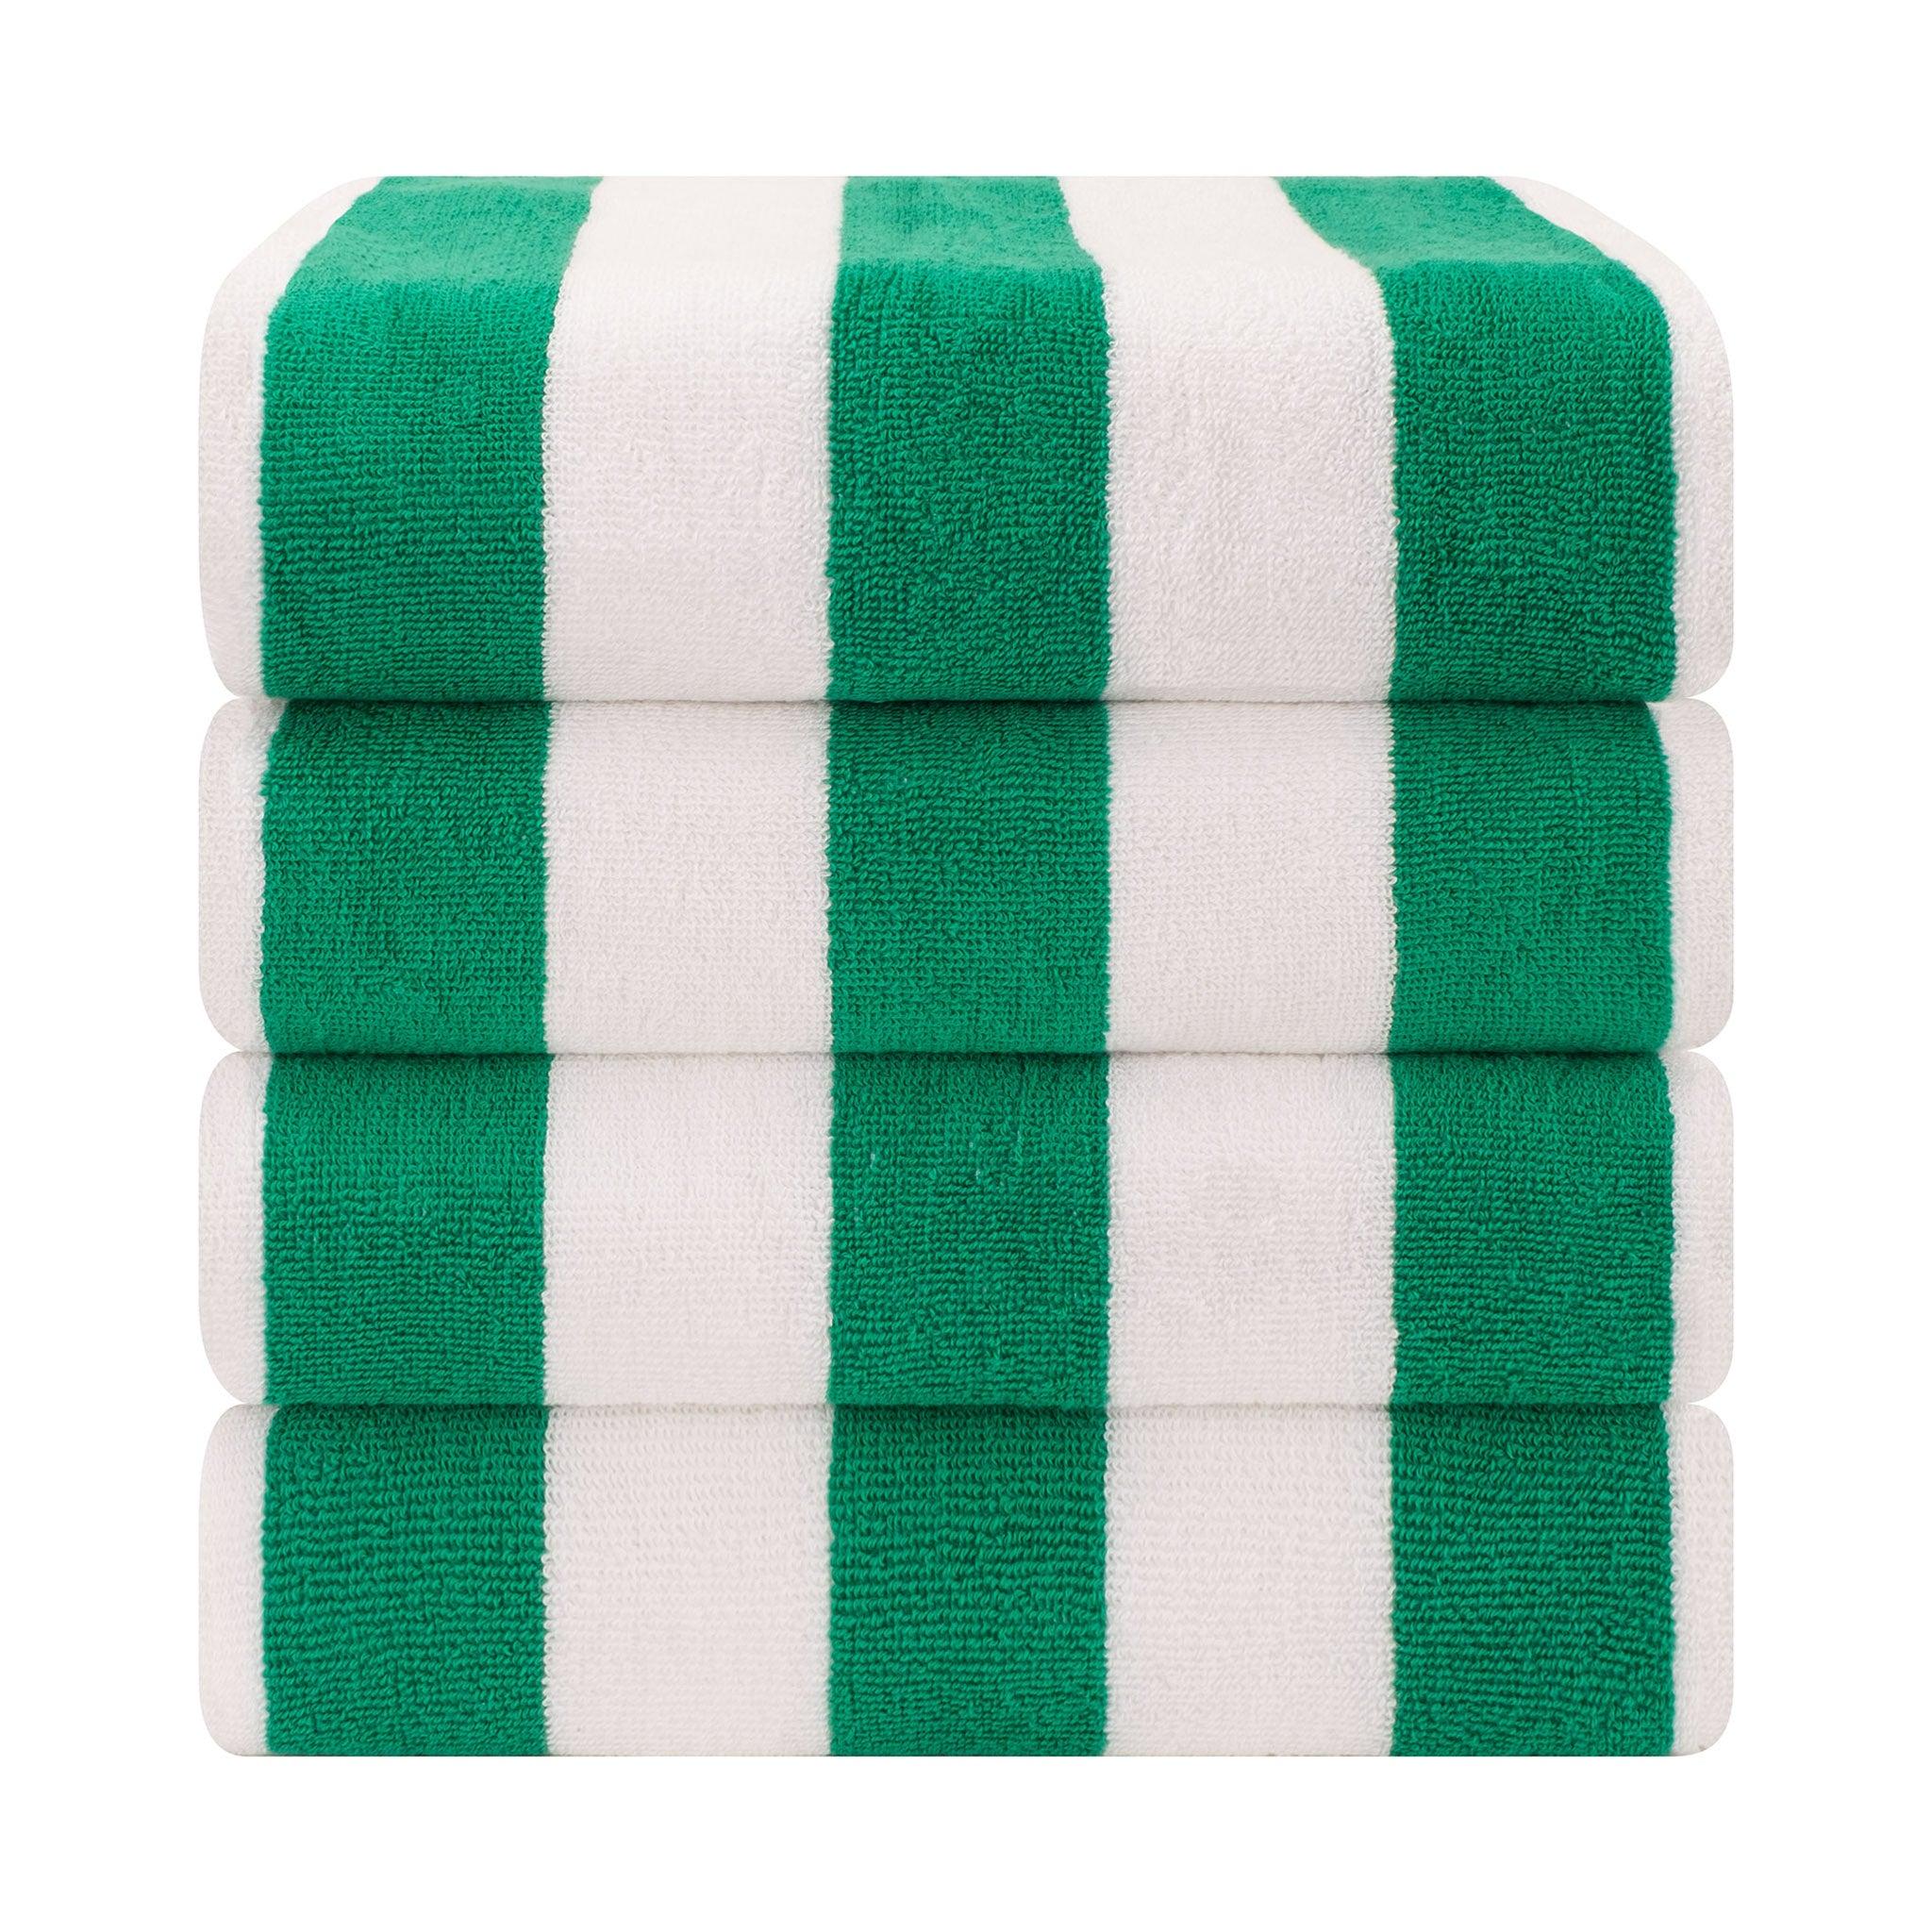 American Soft Linen 100% Cotton 4 Pack Beach Towels Cabana Striped Pool Towels -green-2